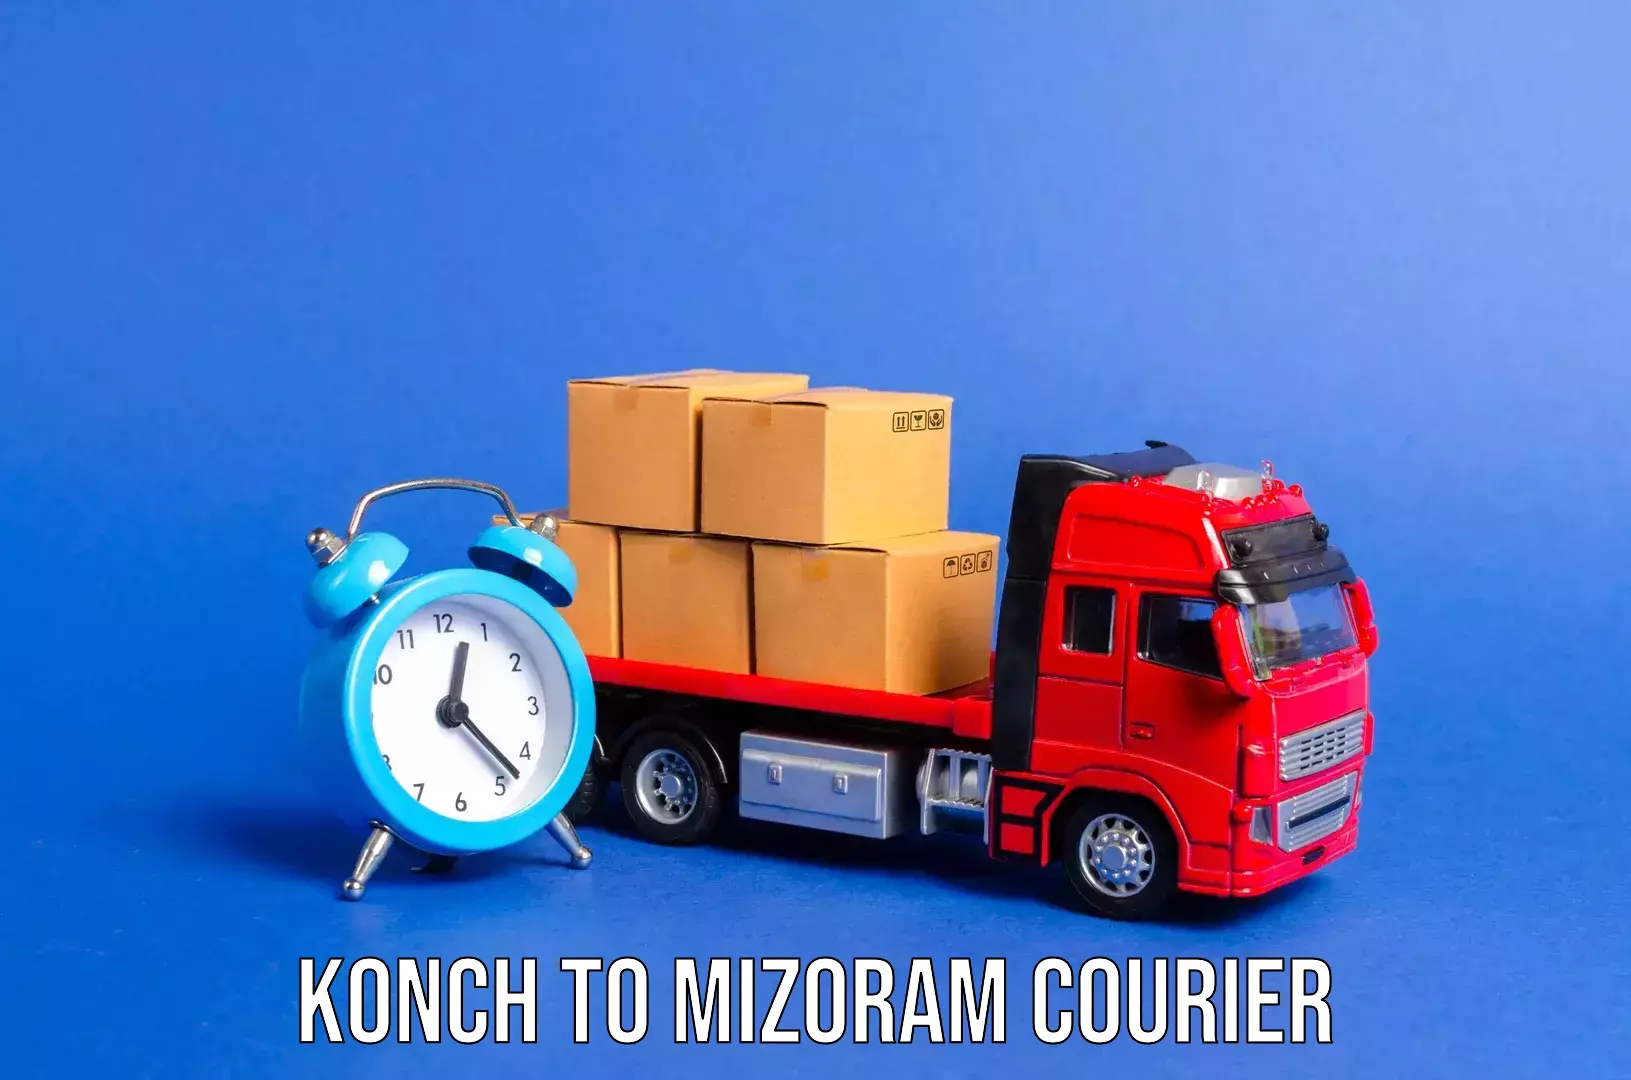 Luggage shipment specialists Konch to Hnahthial